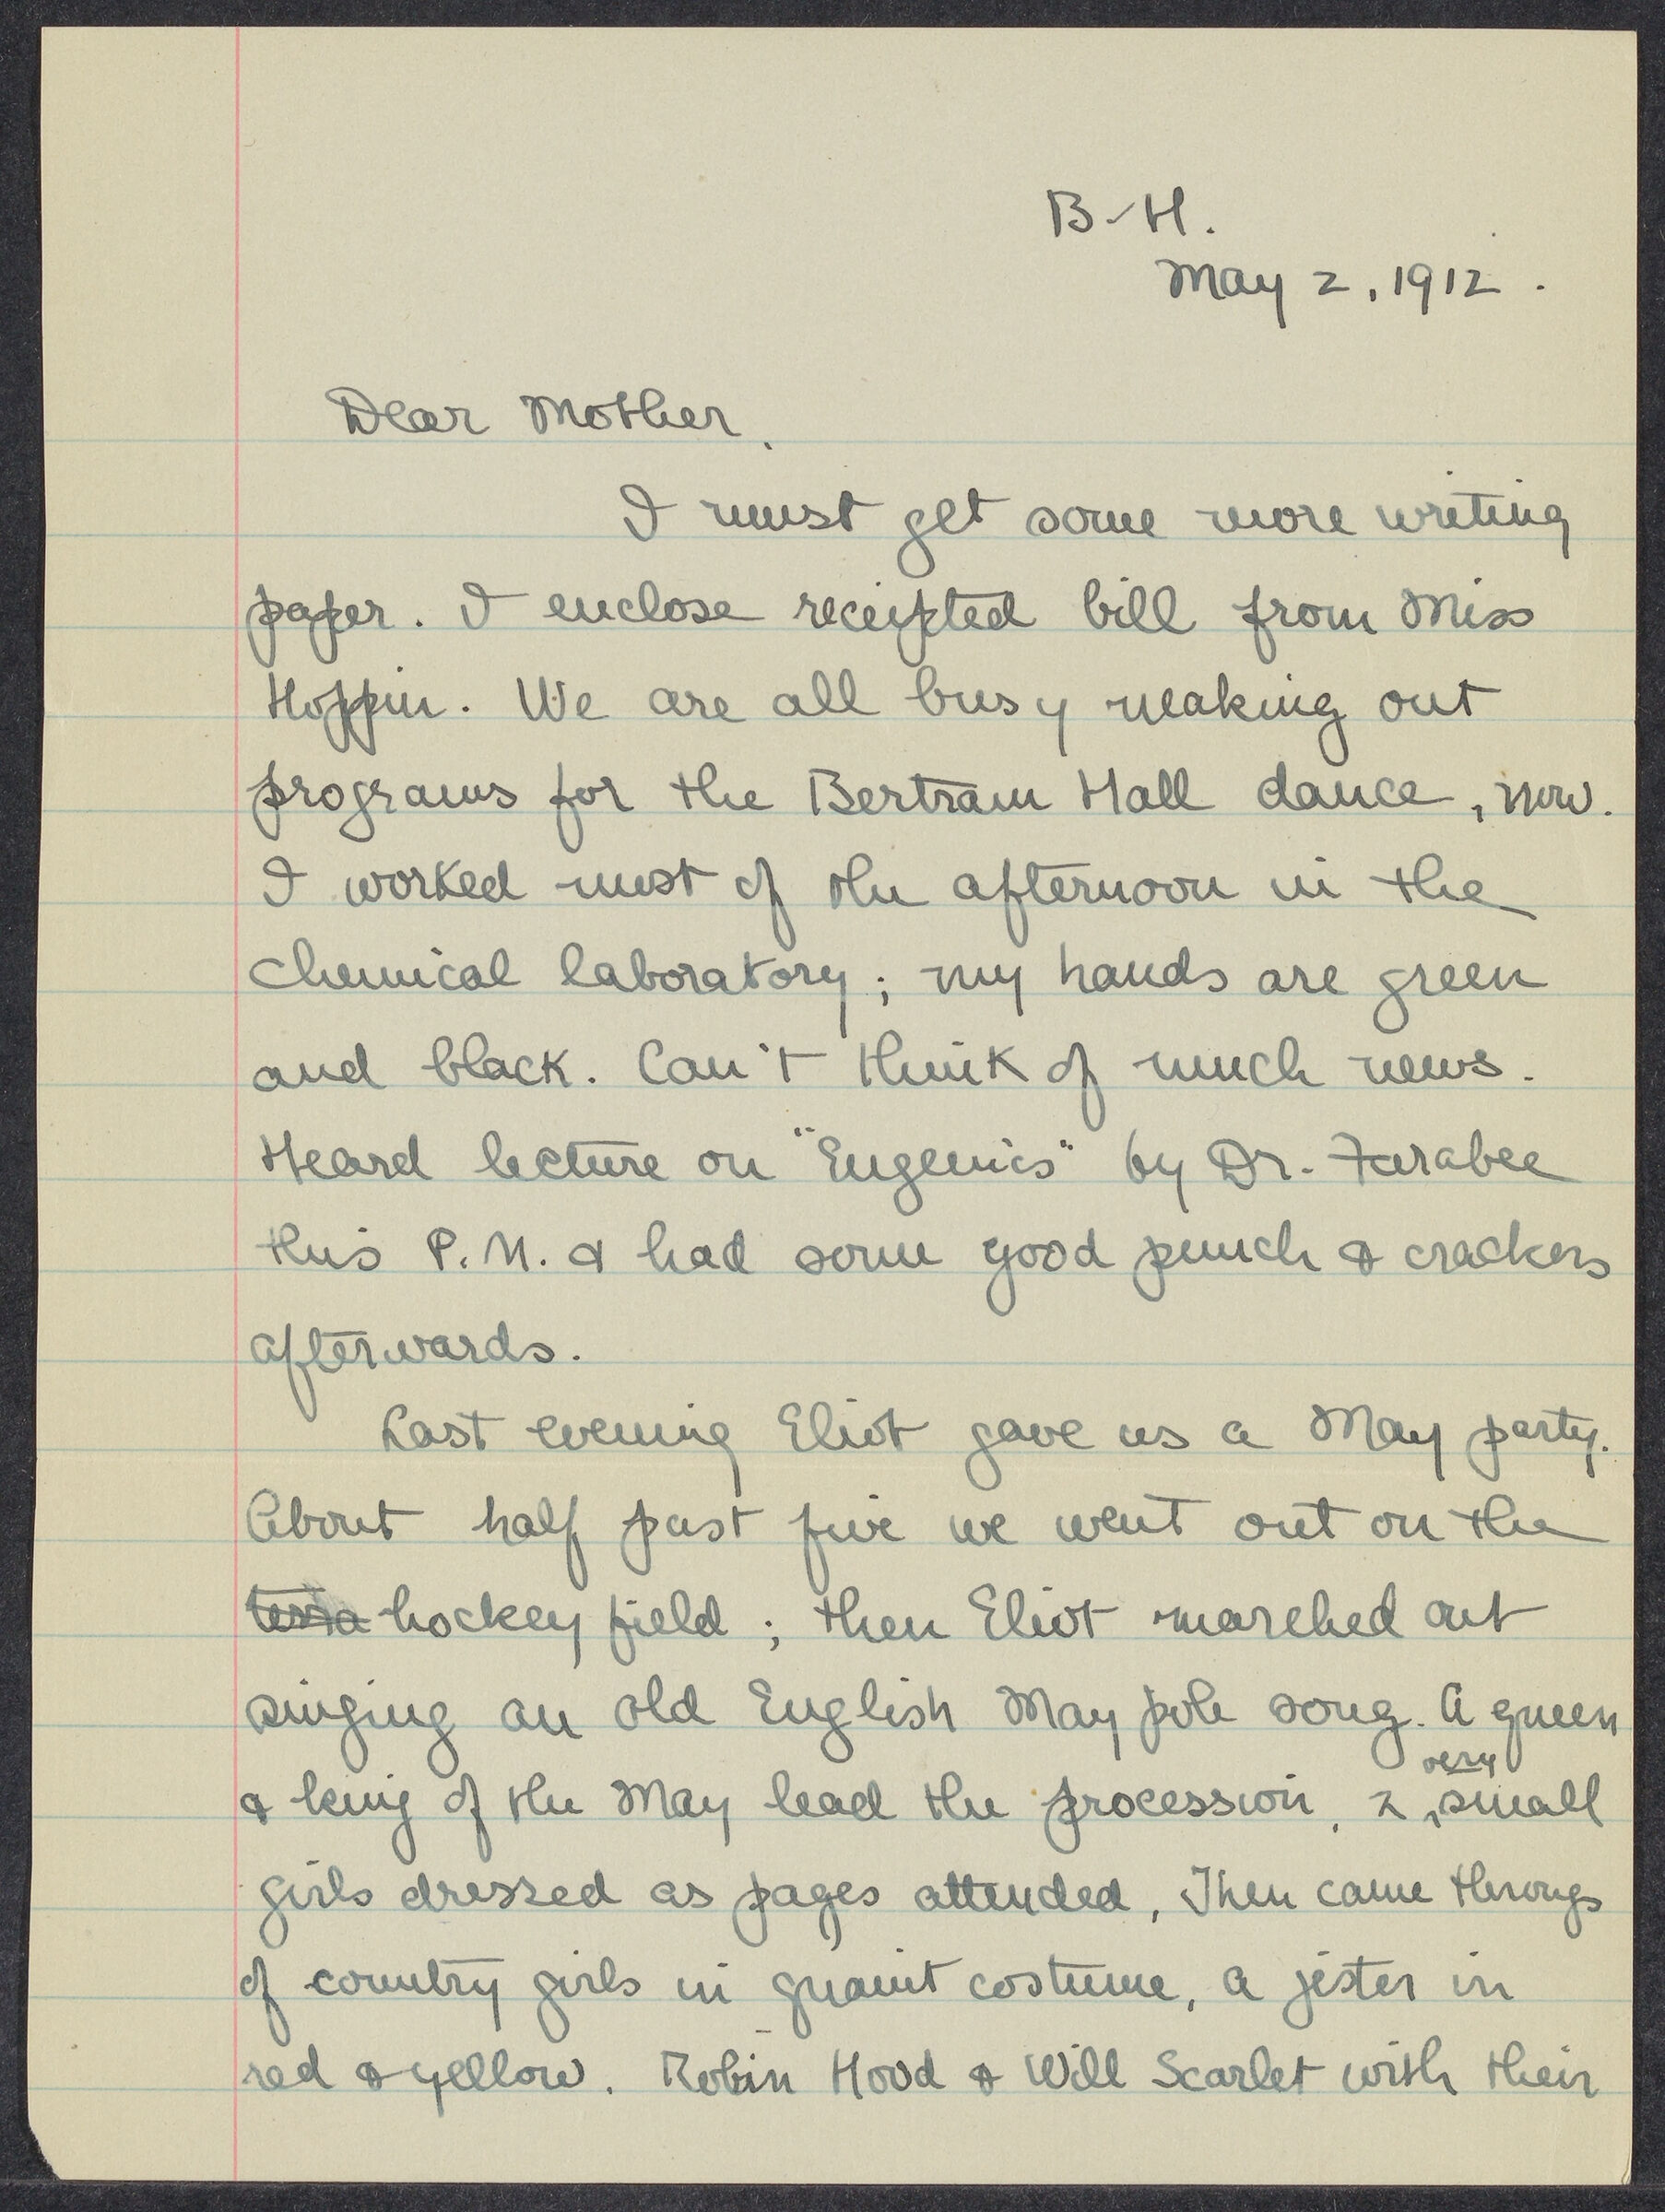 Letters from Eleanor Stabler Brooks to her parents, May-June, October 1912